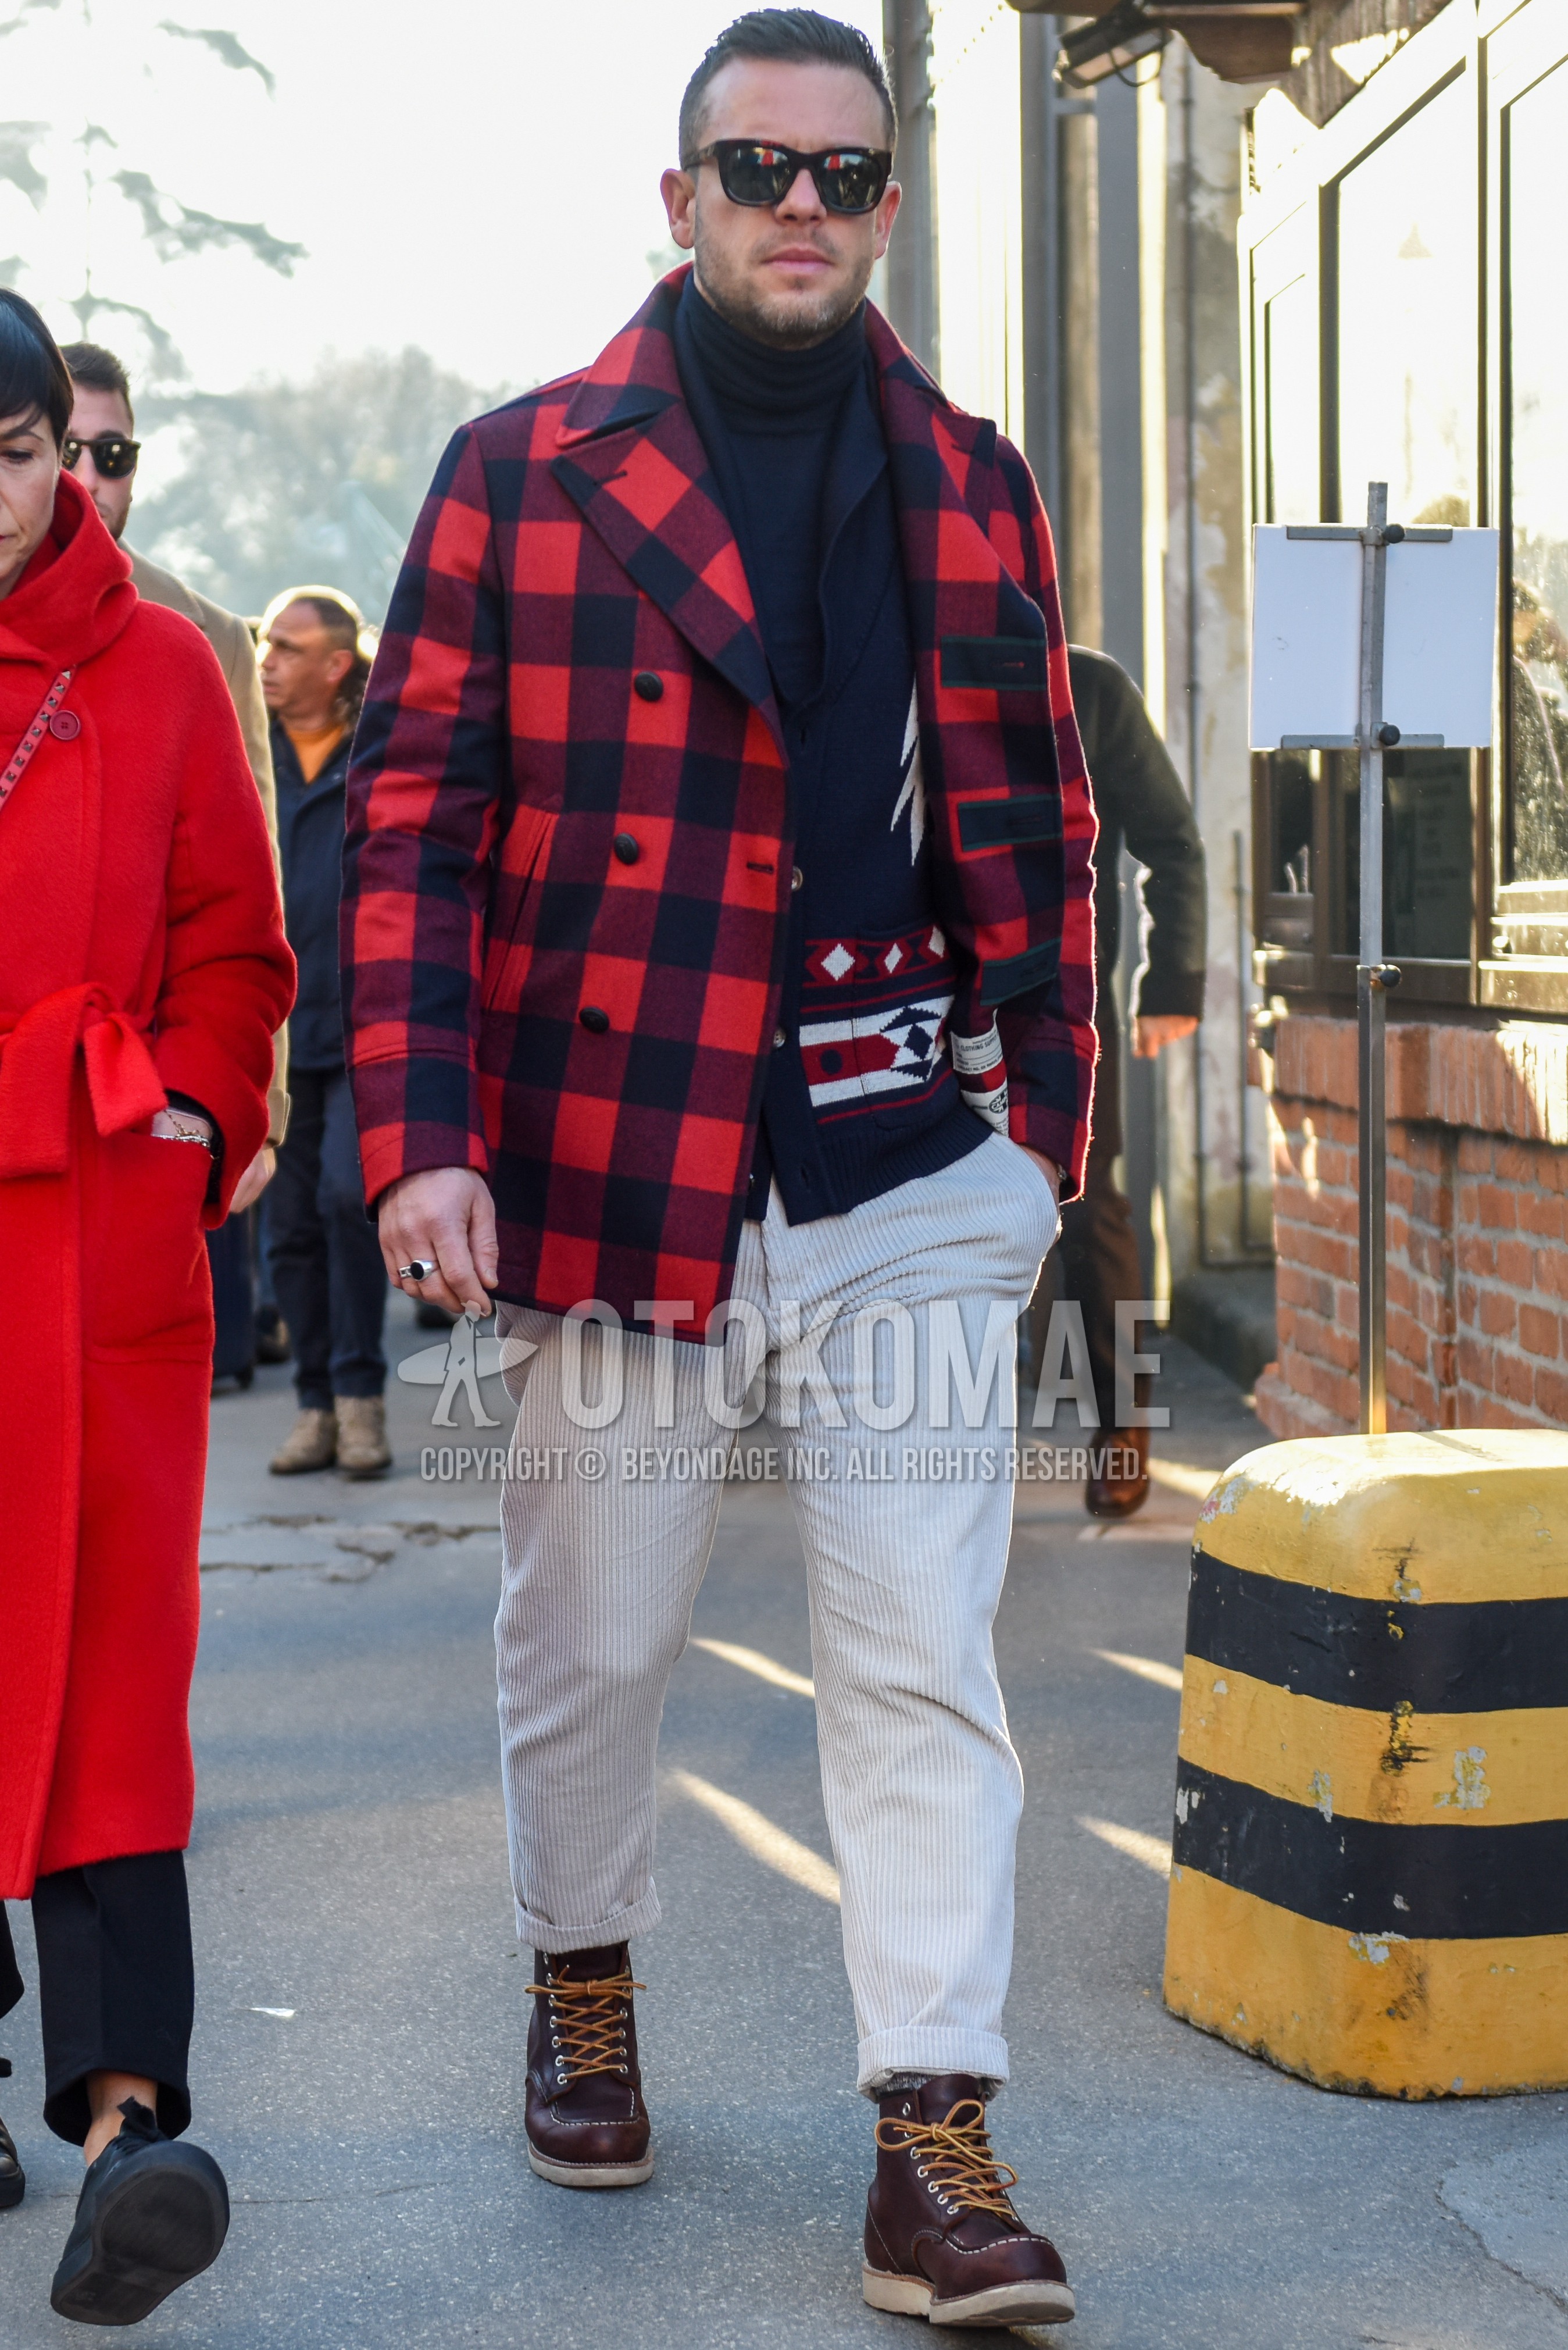 Men's autumn winter outfit with brown tortoiseshell sunglasses, red black check p coat, navy plain turtleneck knit, navy tops/innerwear cardigan, white plain winter pants (corduroy,velour), brown work boots.